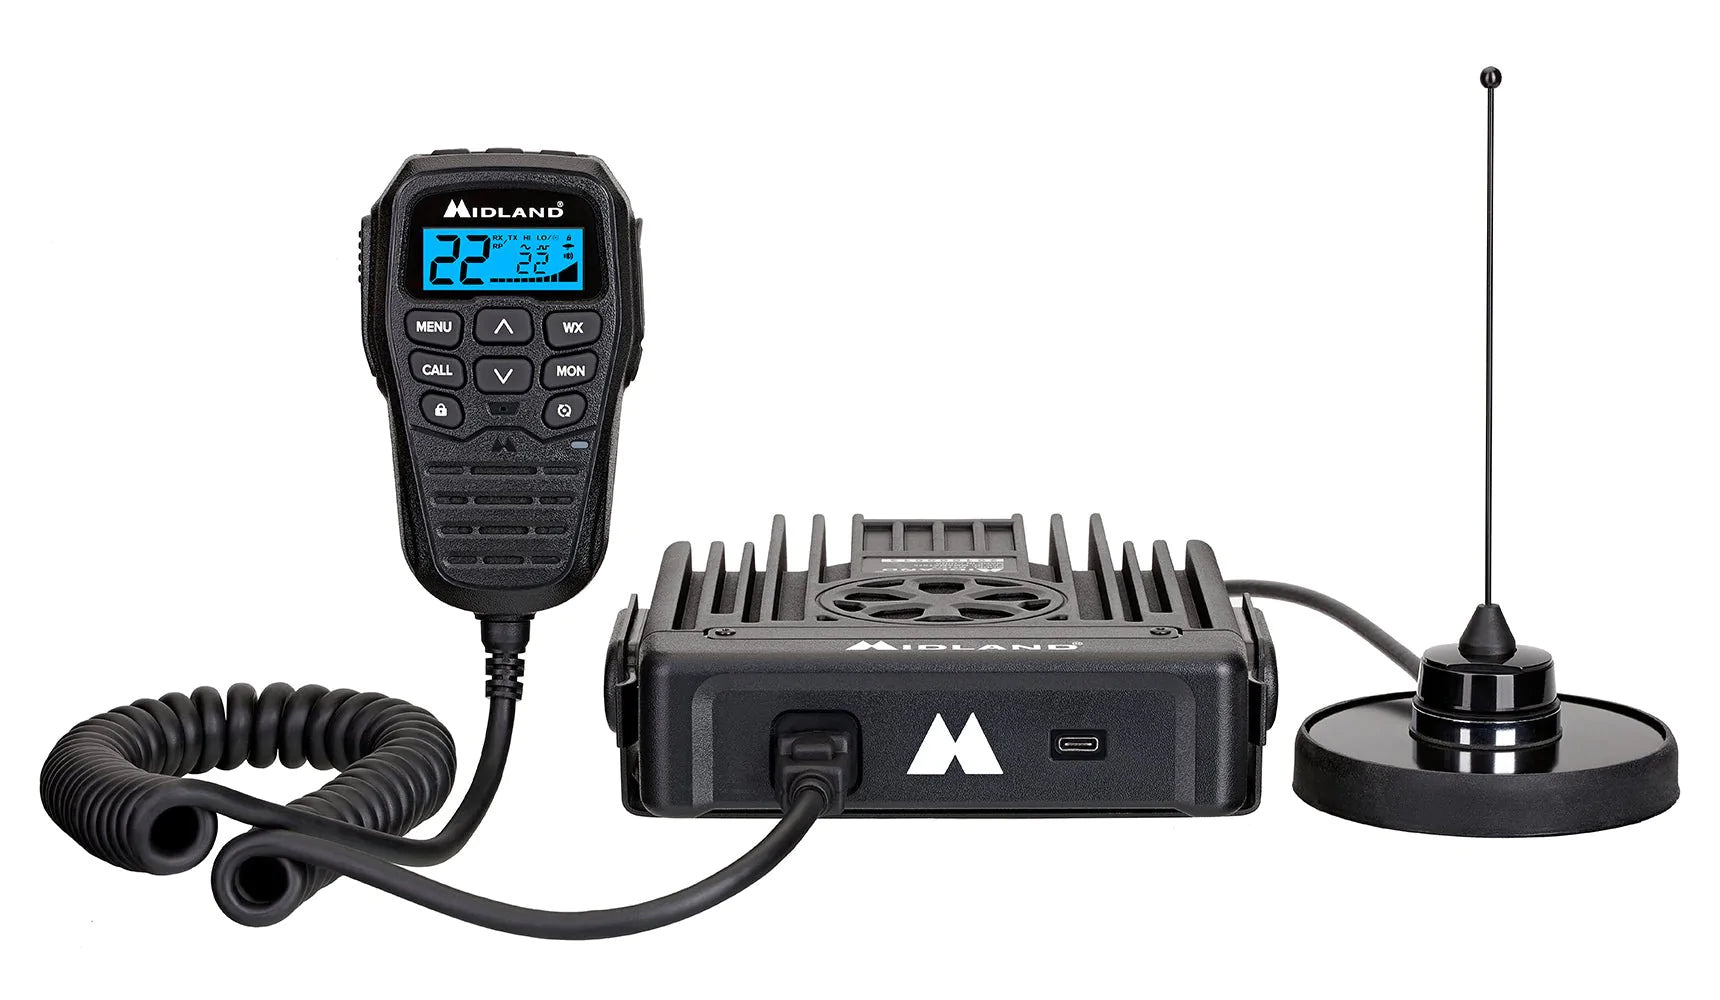 Midland T290X4VP4 X-TALKER GMRS Long Range Walkie Talkie Two Way Radio with NOAA Weather Scan   Alert, and 121 Privacy Codes (Black Silver, Radios - 3